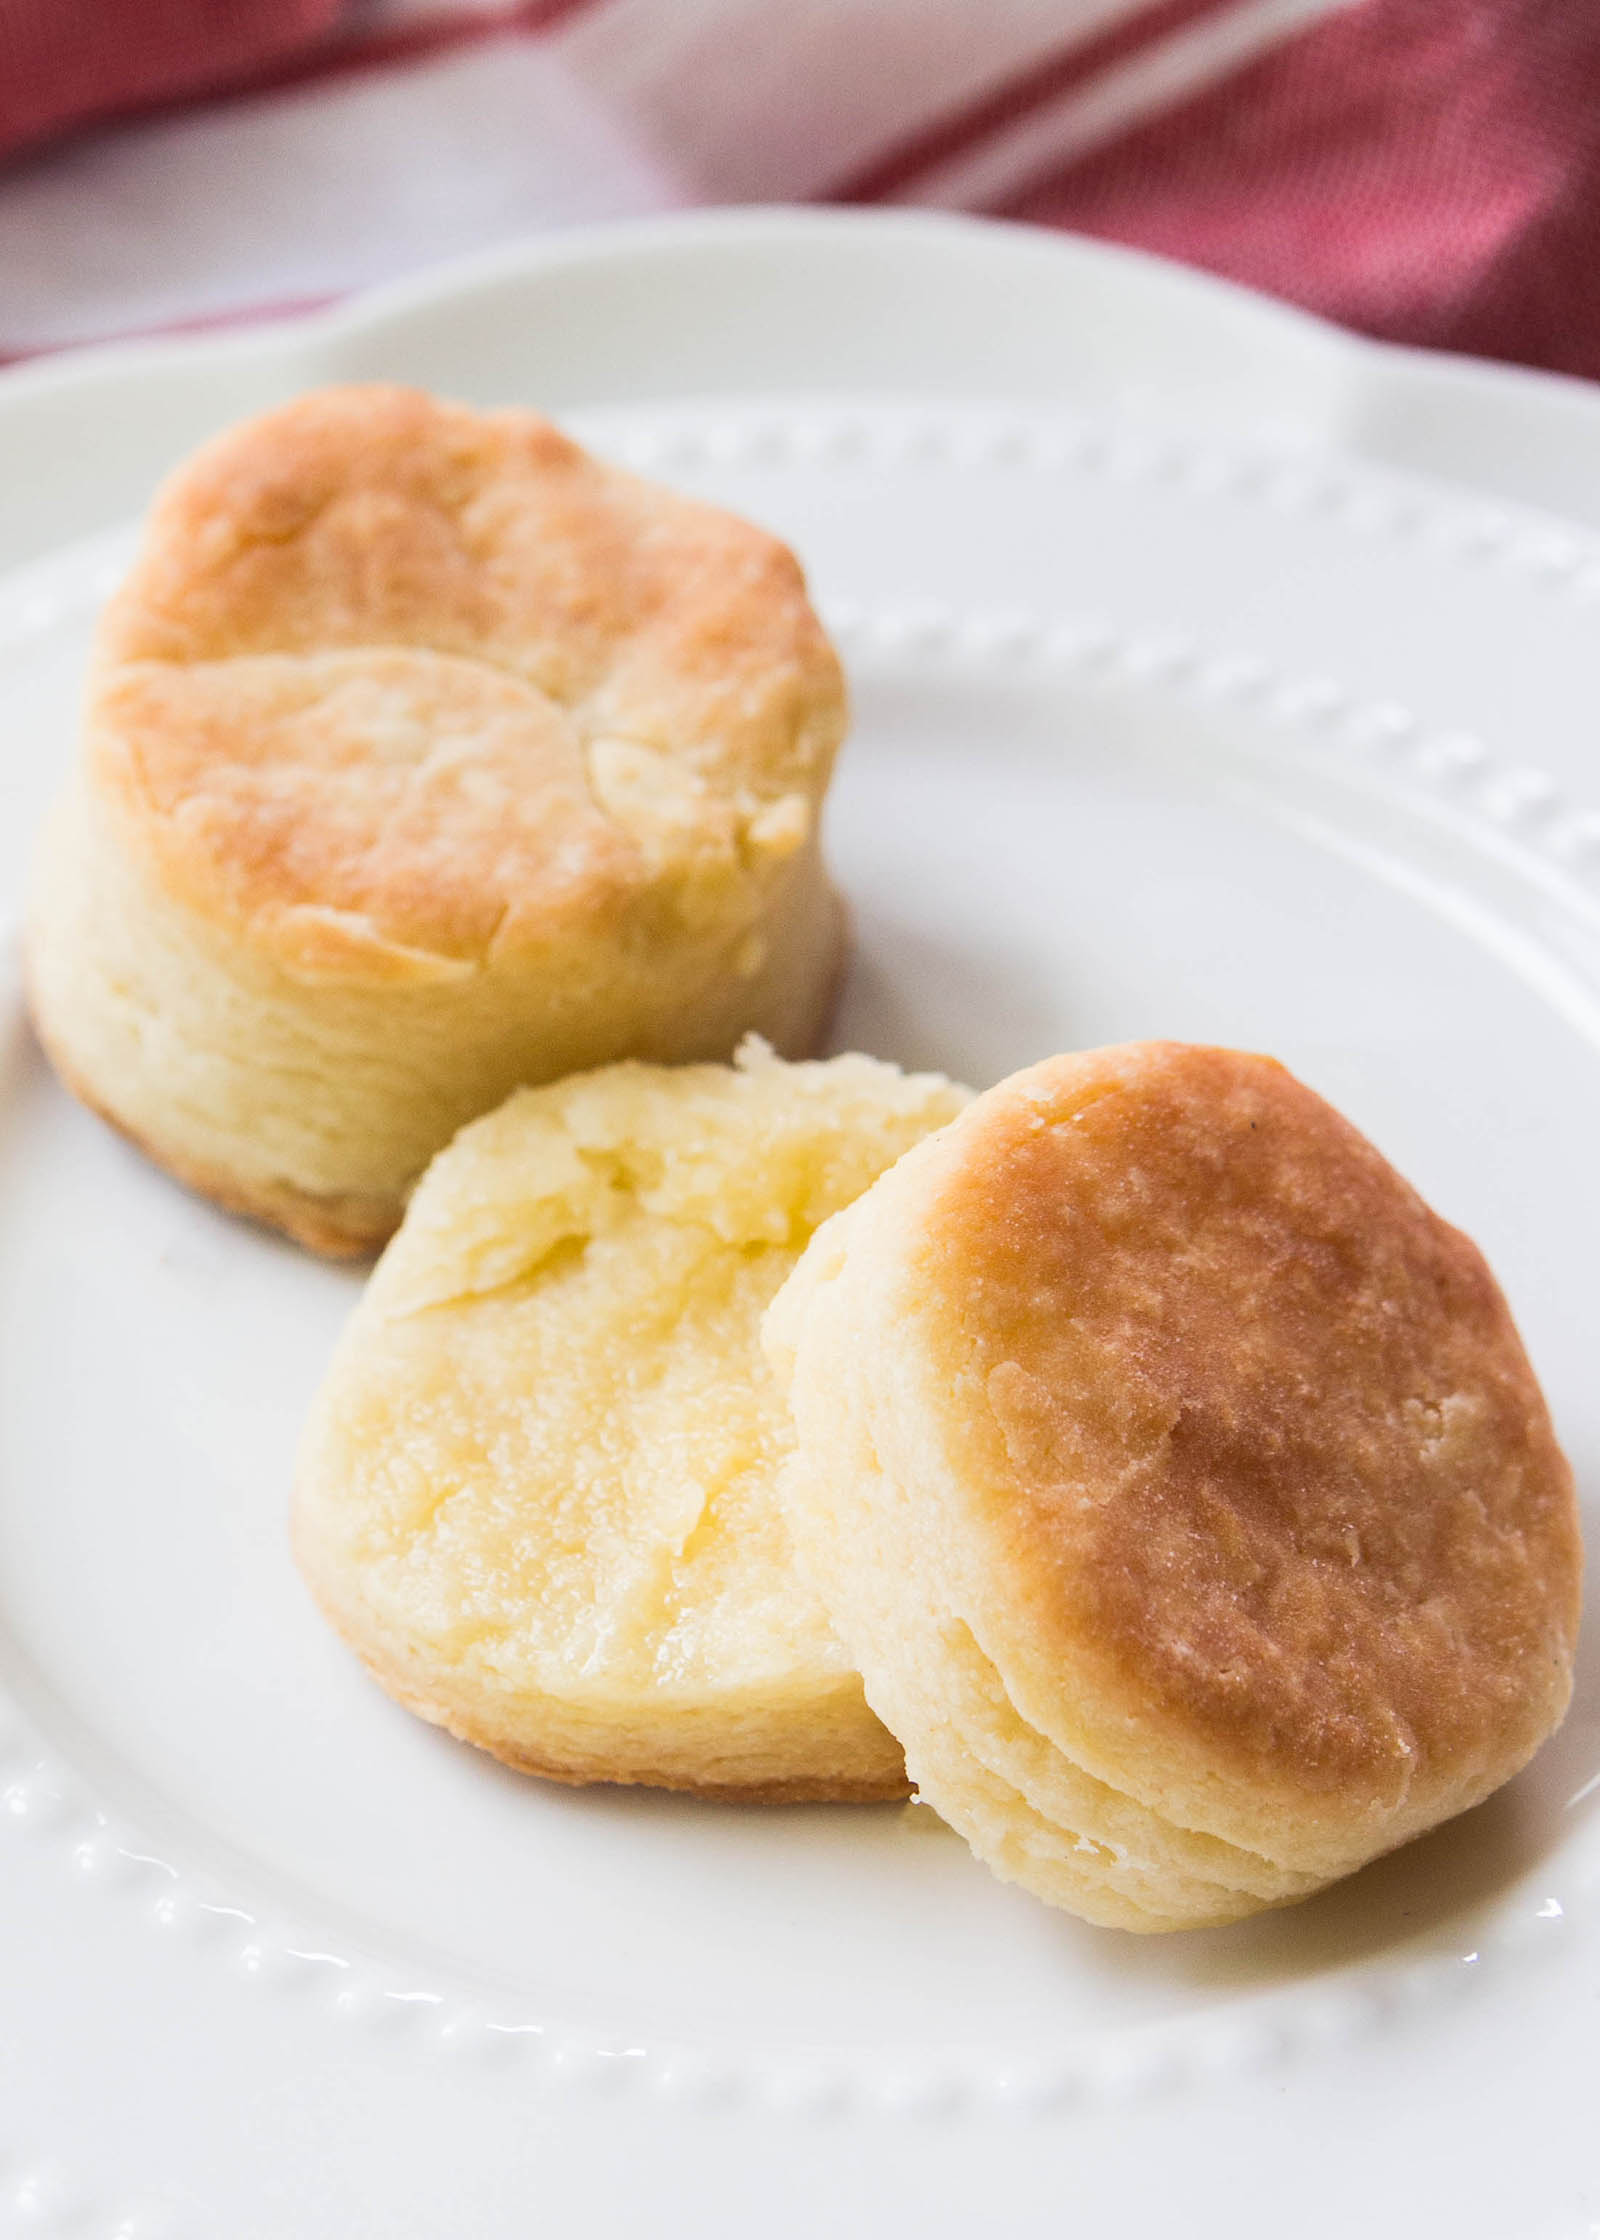 How to Make Fluffy, Flaky, Mile-High Gluten-free Biscuits ...